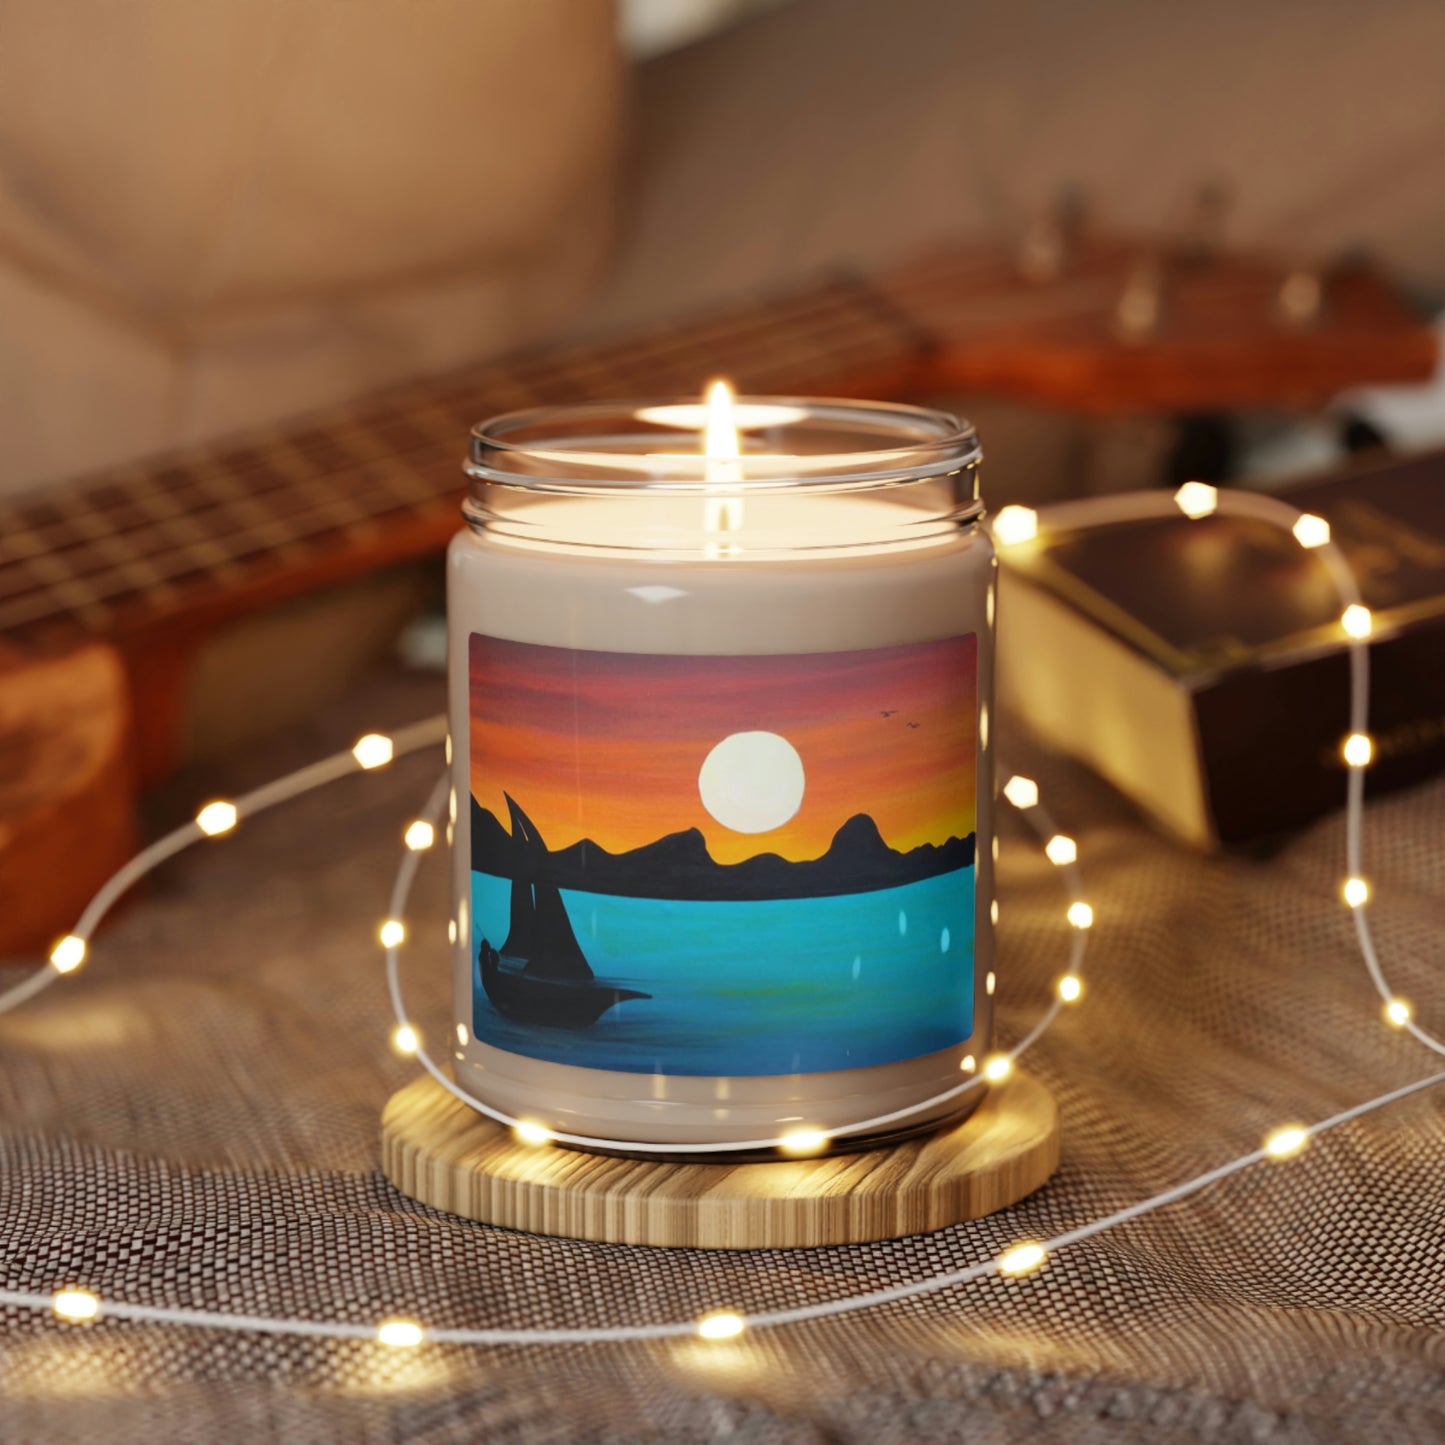 "Sunset on the Nile River"  by African Artist, Wambi Joseph - Scented Soy Candle, 9oz